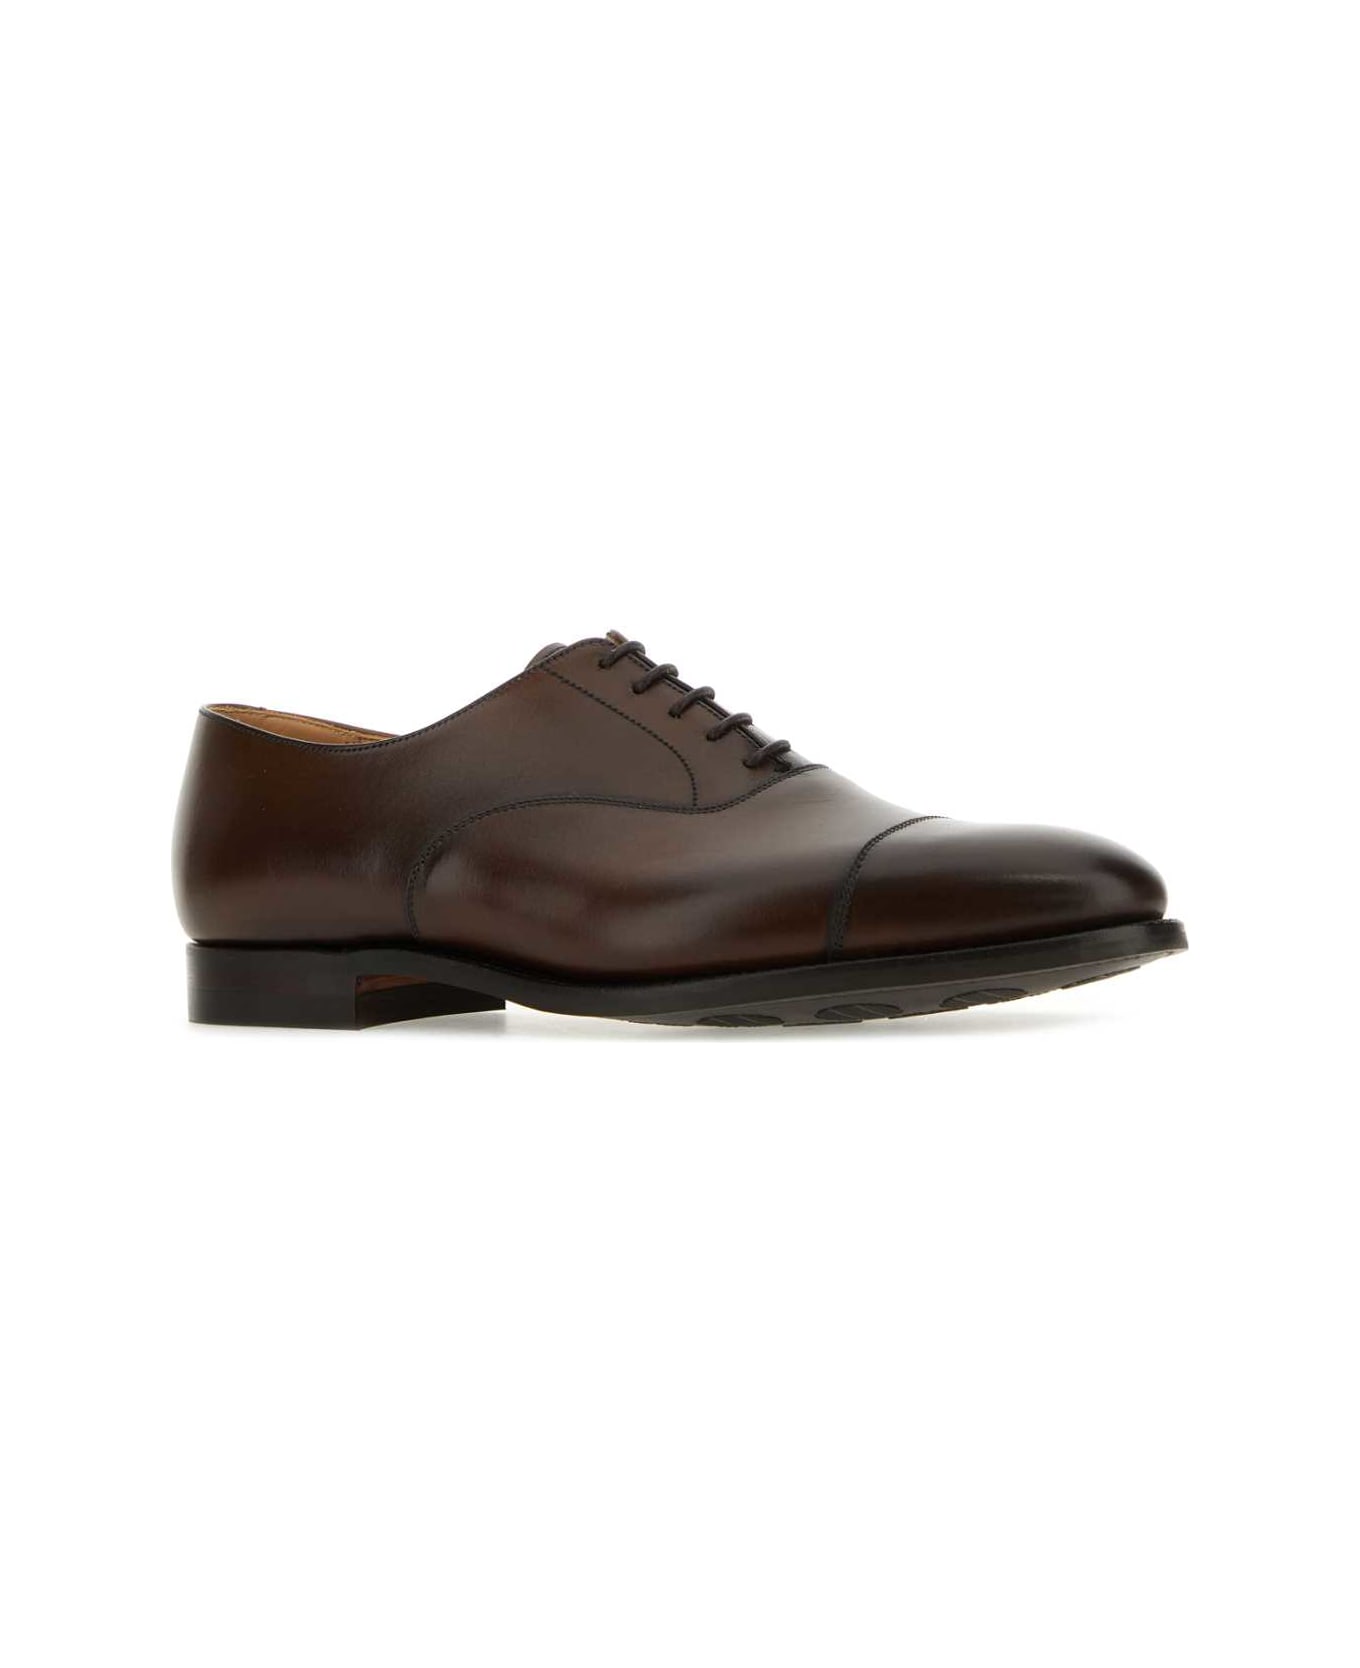 Crockett & Jones Chocolate Leather Connaught 2 Lace-up Shoes - DARKBROWN